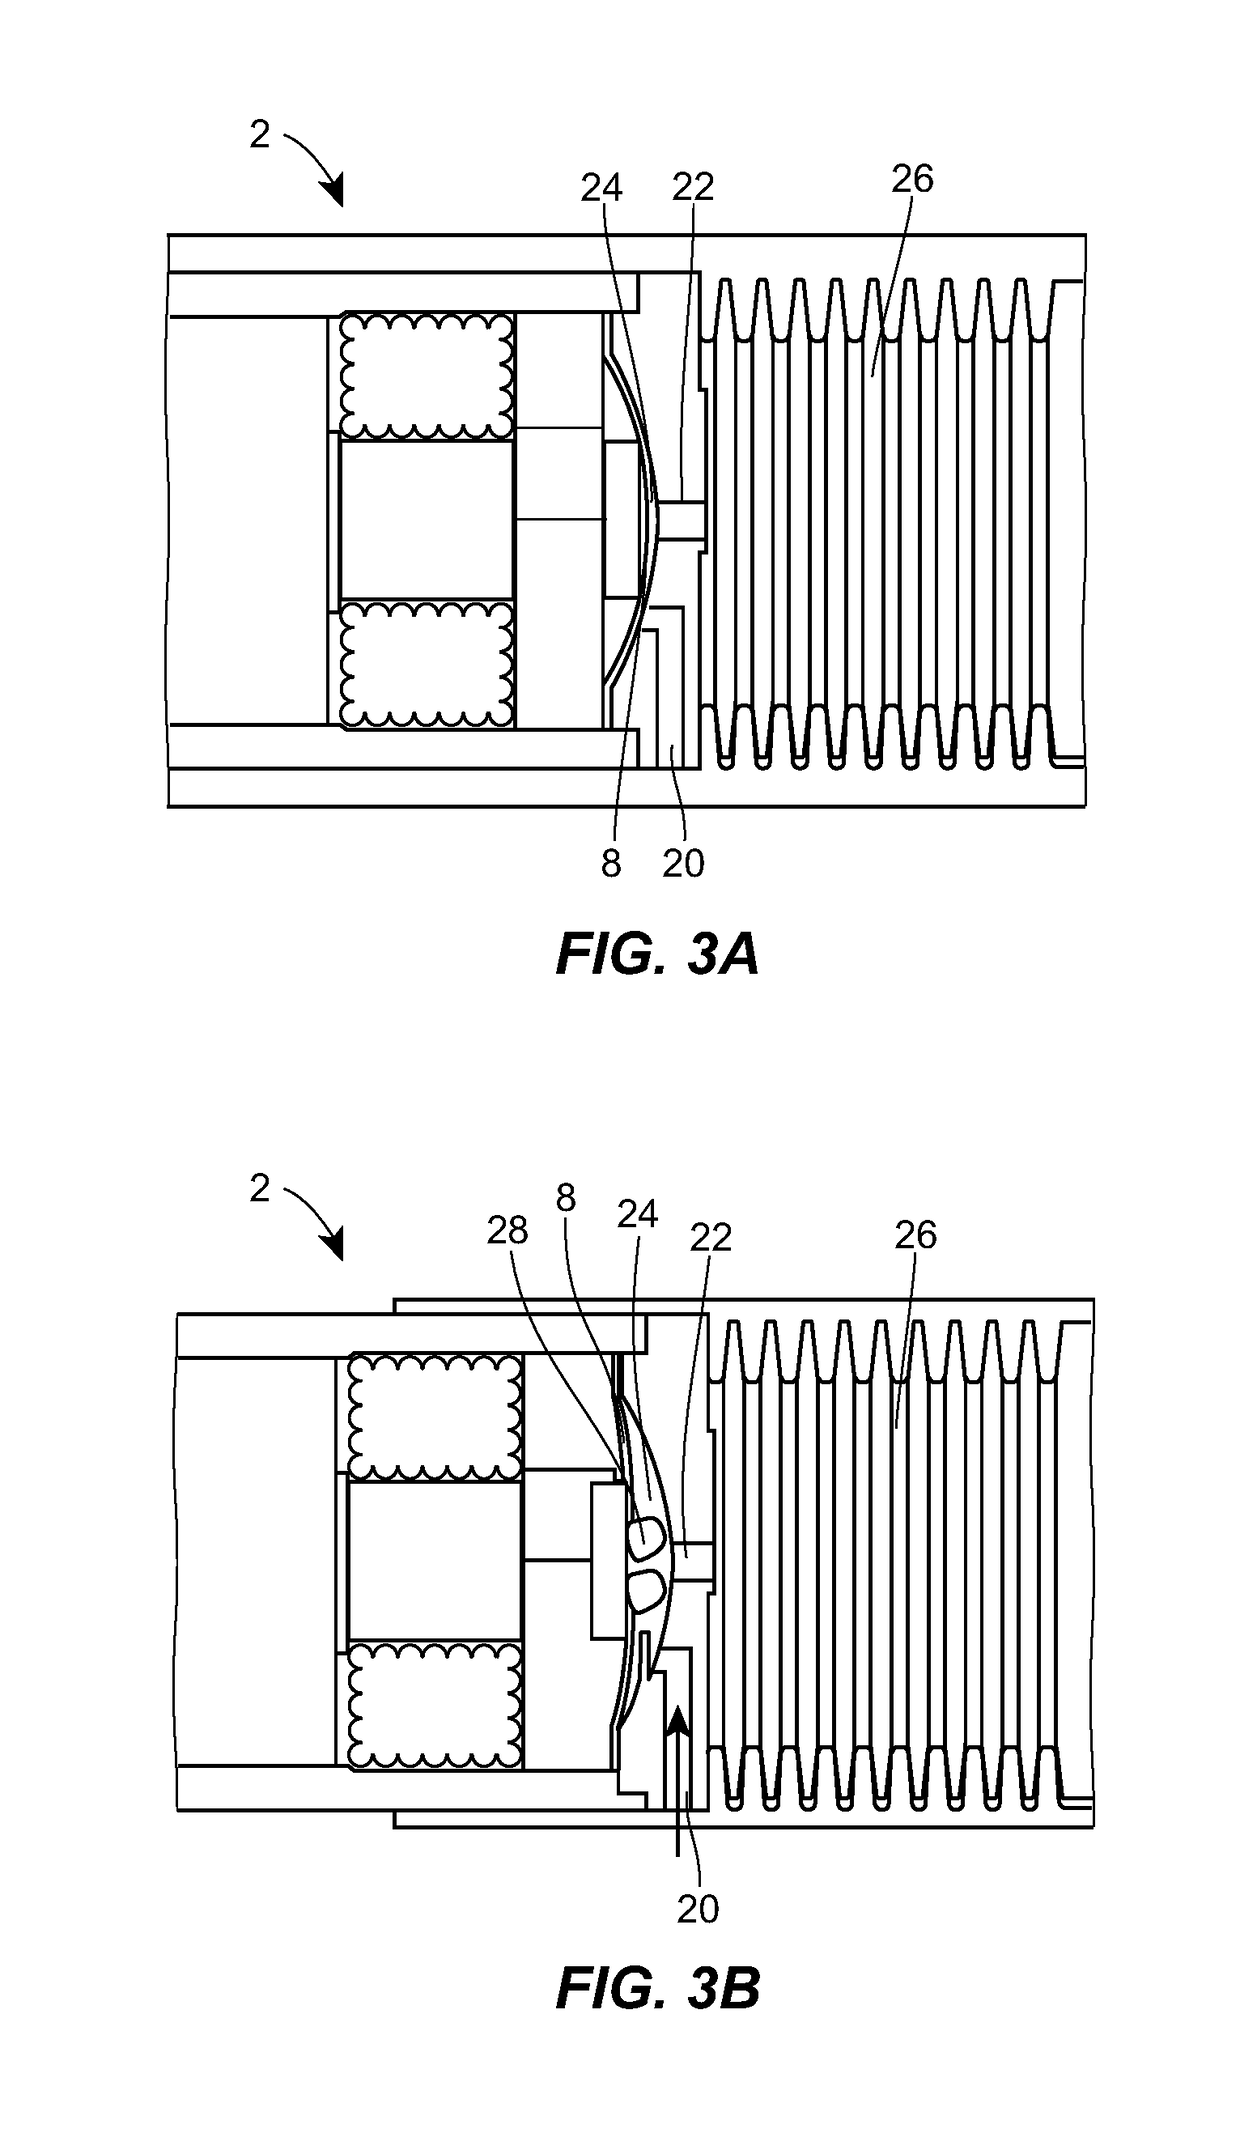 Ingestible Capsule Device for Collecting Fluid Aspirates